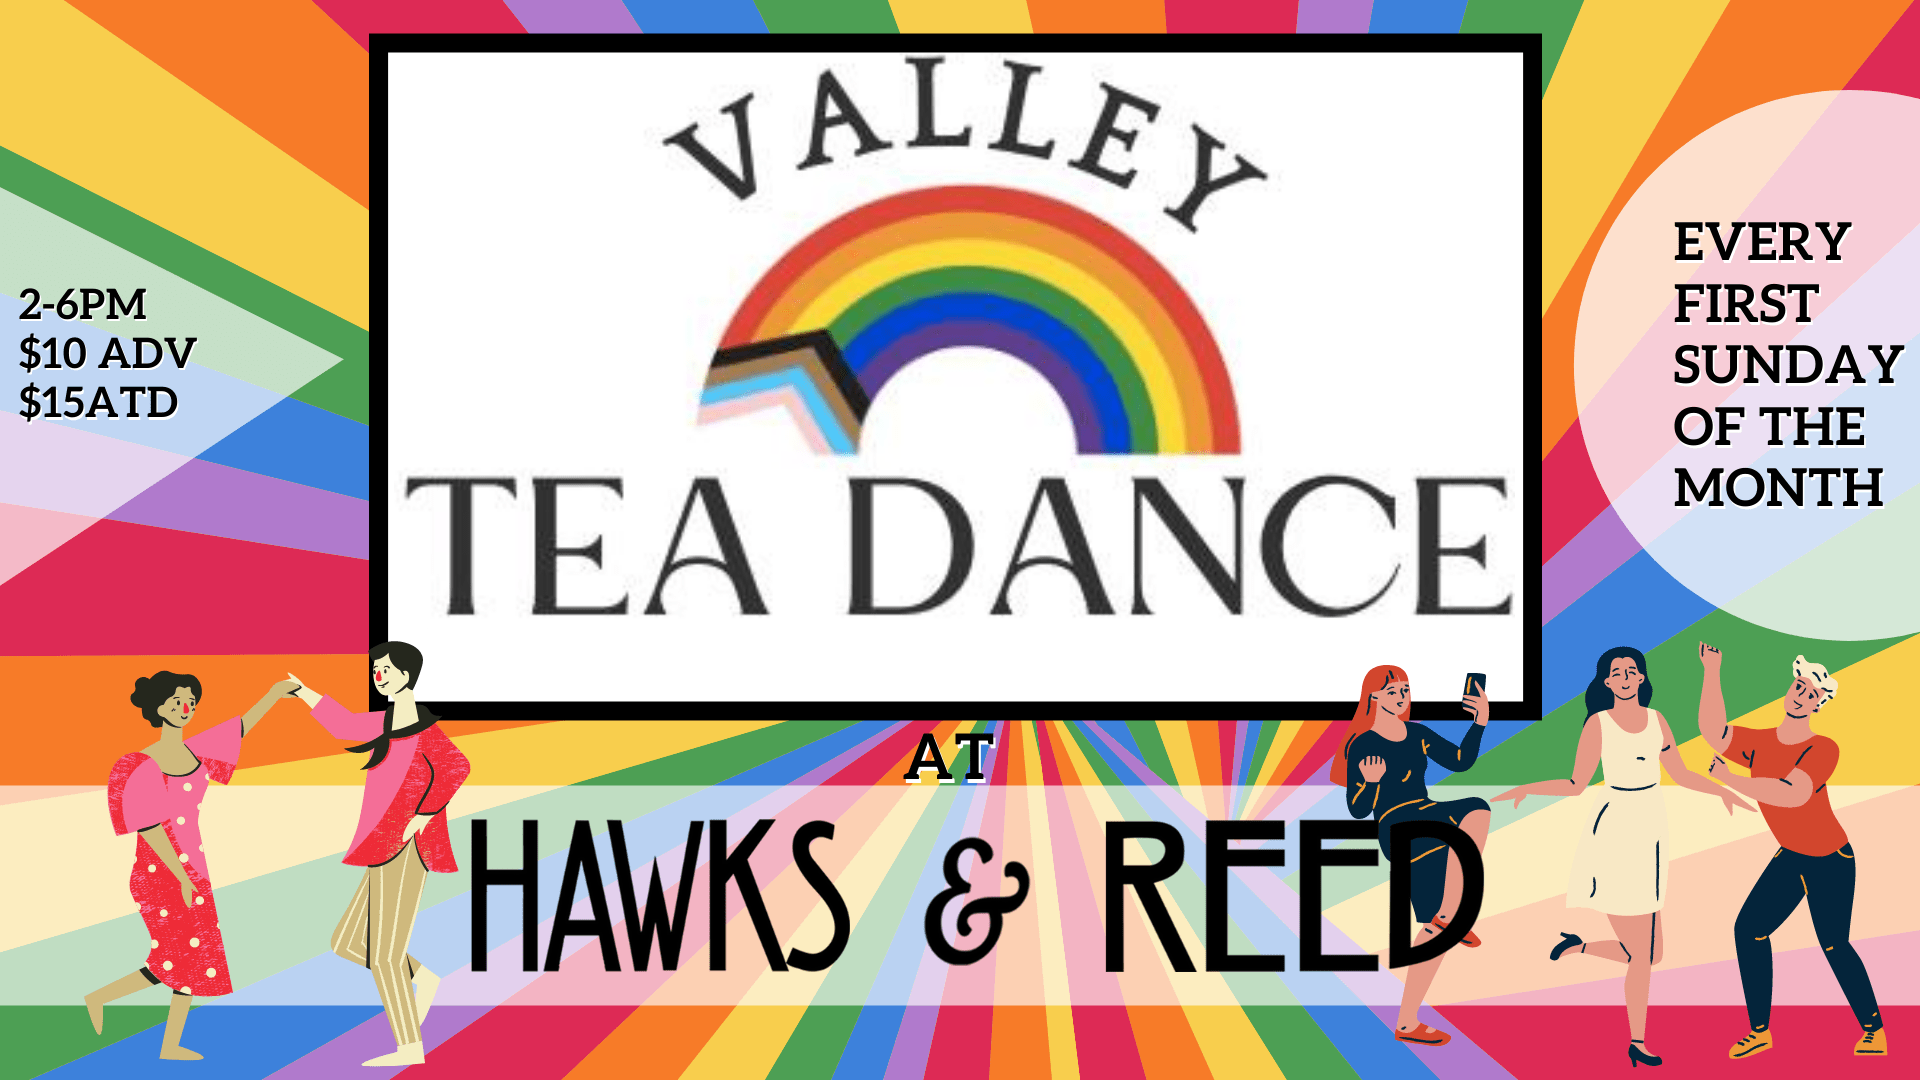 Valley Tea Dance at Hawks and Reed!